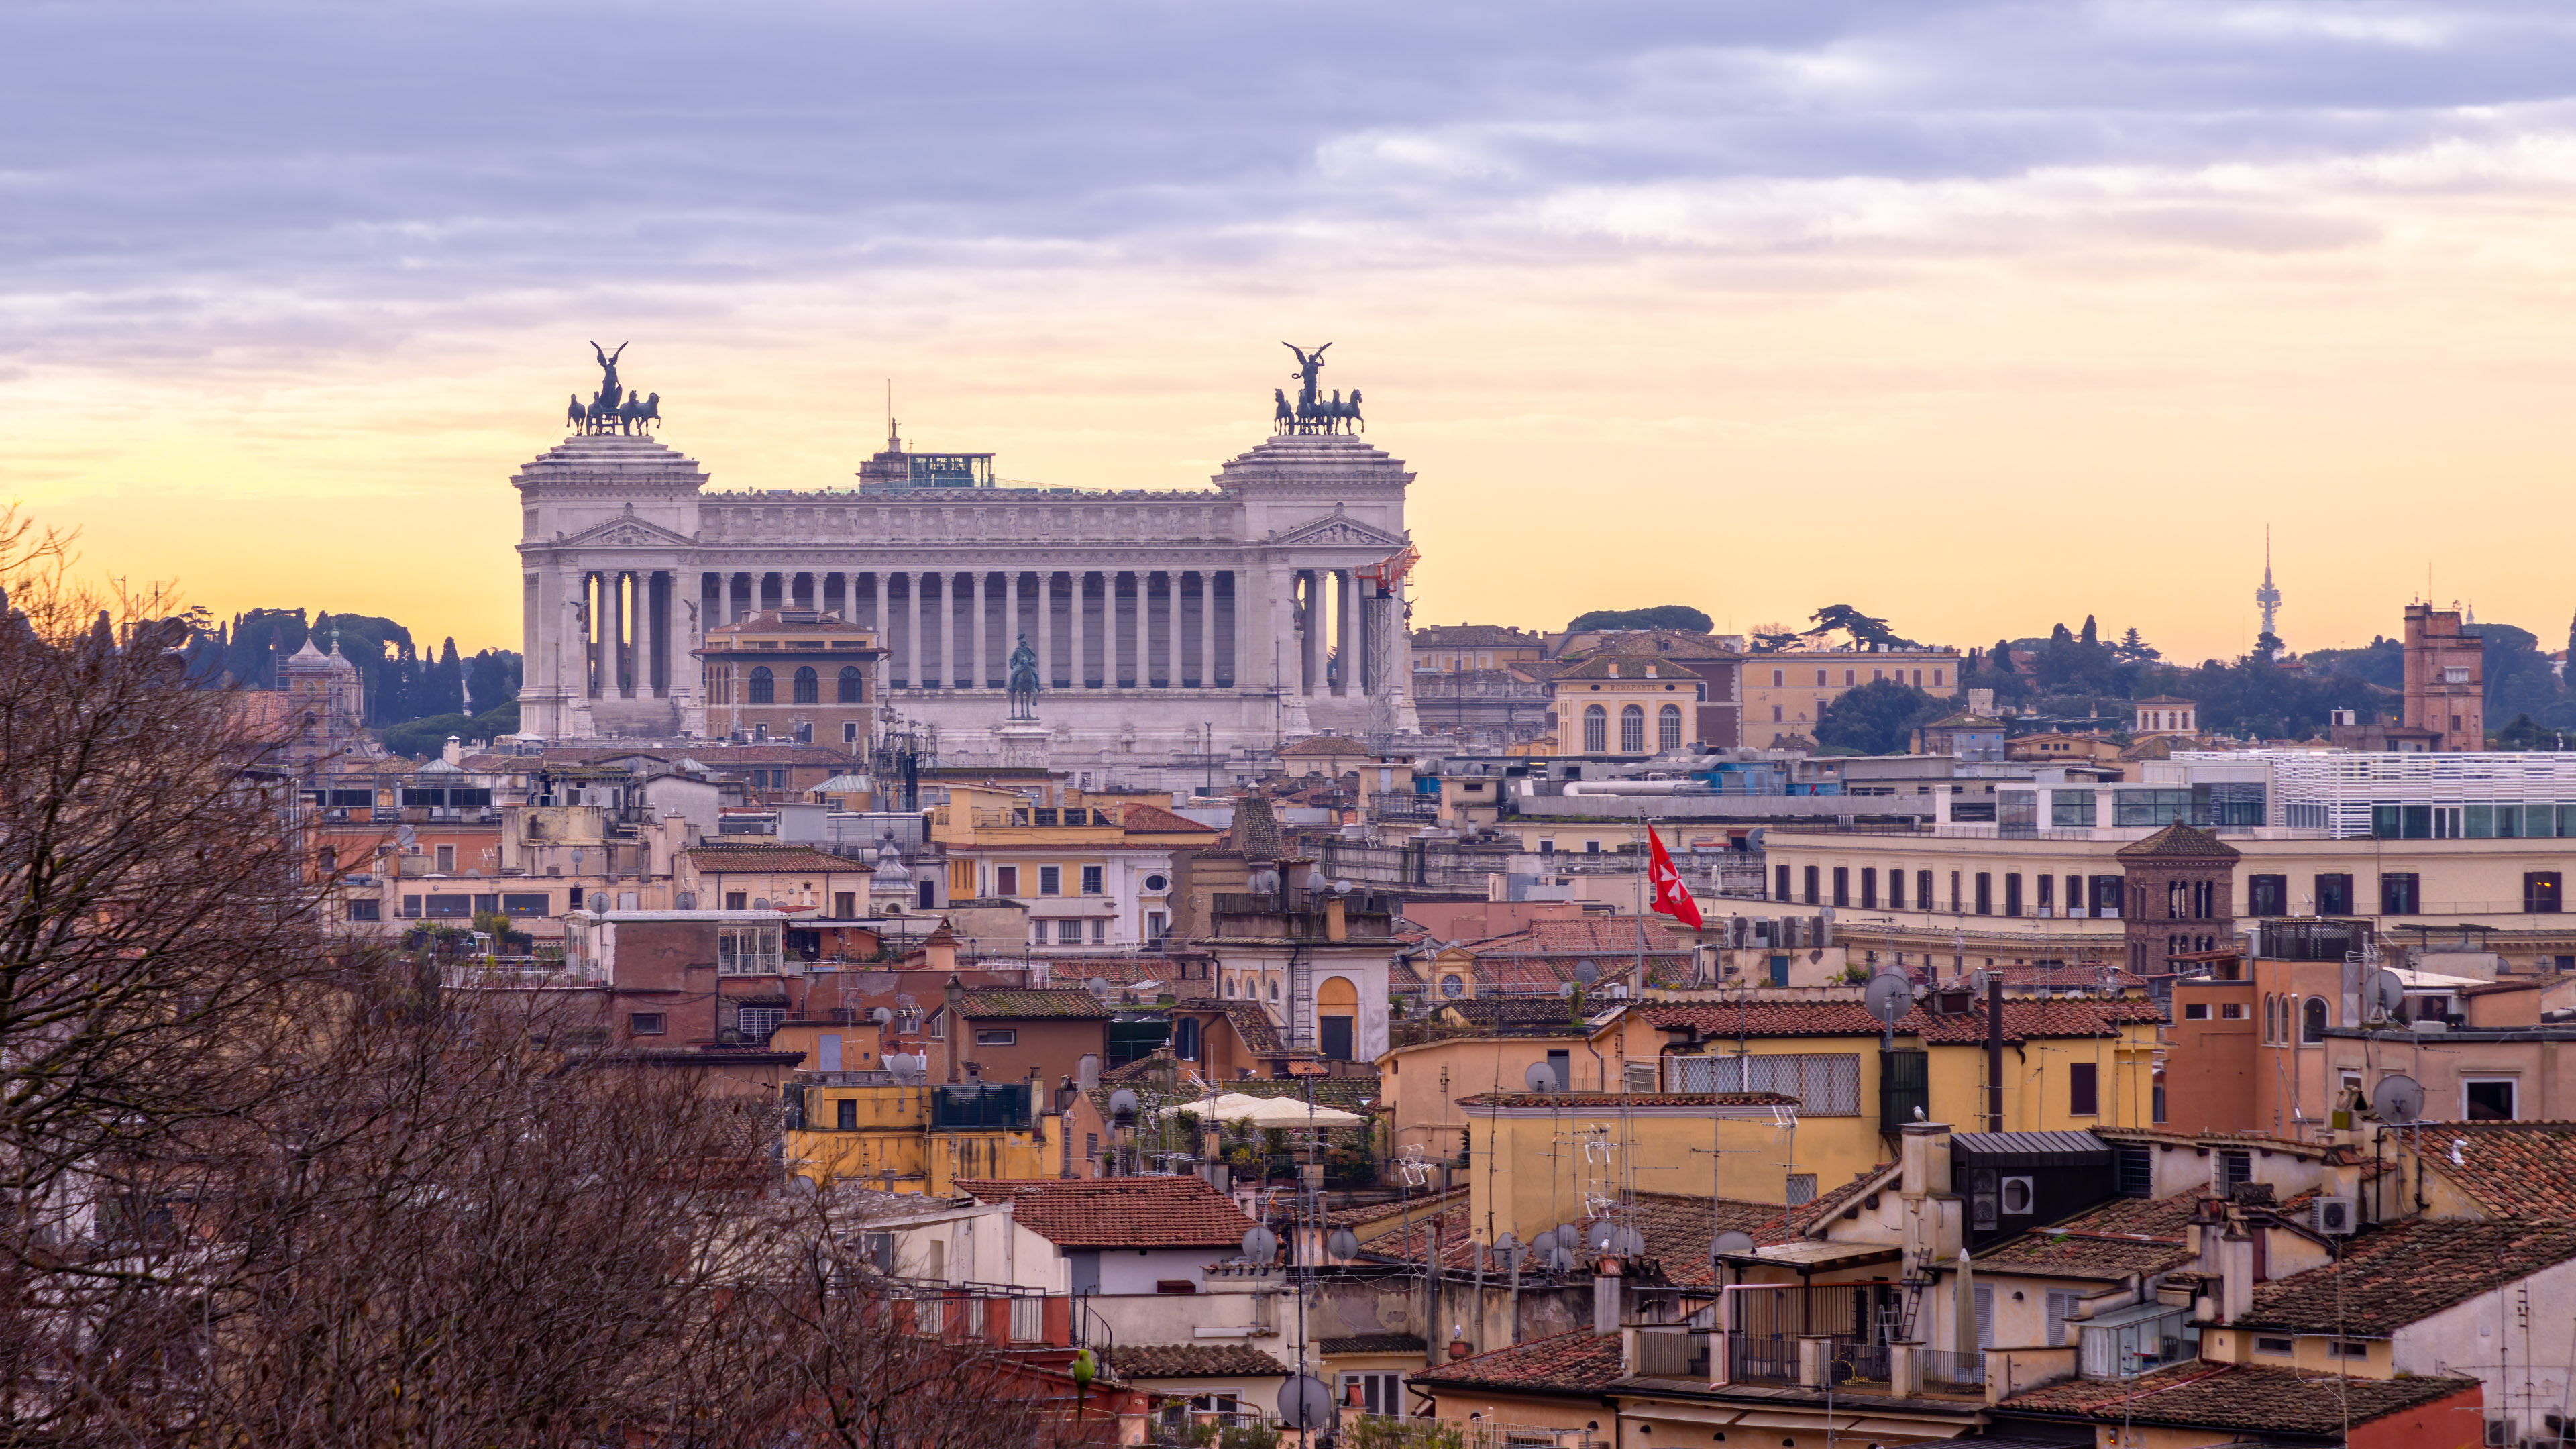 Embark on a virtual journey with our city skylines wallpaper of Rome, capturing the iconic landmarks and architectural marvels.